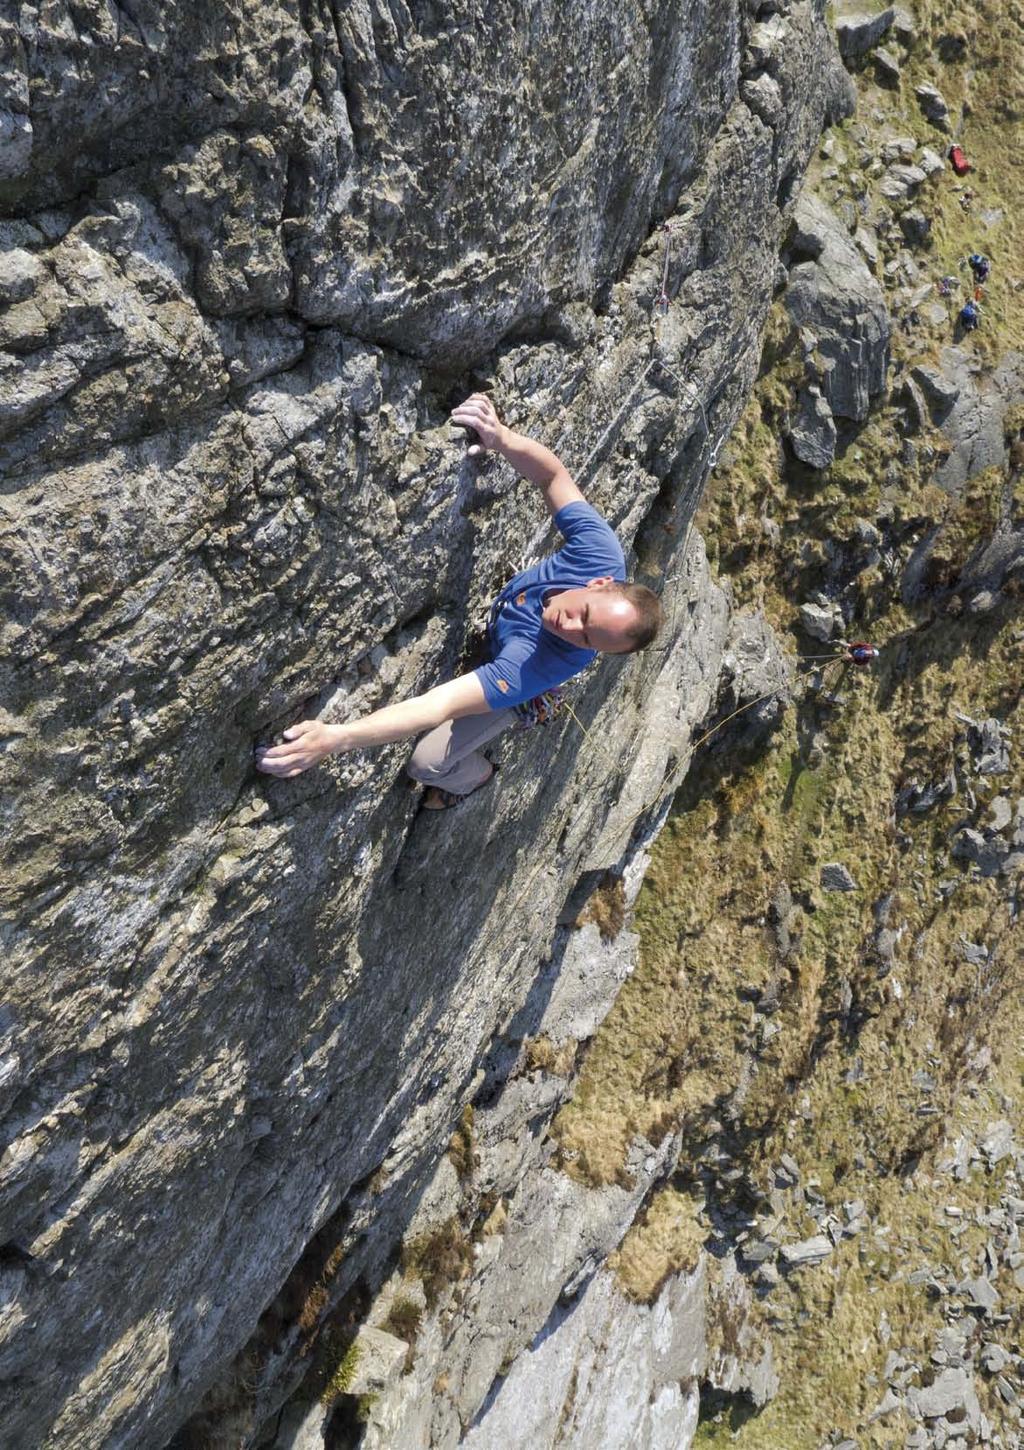 North Wales Climbs Mark Reeves Jack Geldard Mark Glaister A climbing guidebook to selected routes on the crags of North Wales Cover photo: Alexandra Schweikart, belayed by Christopher Igel, on Left